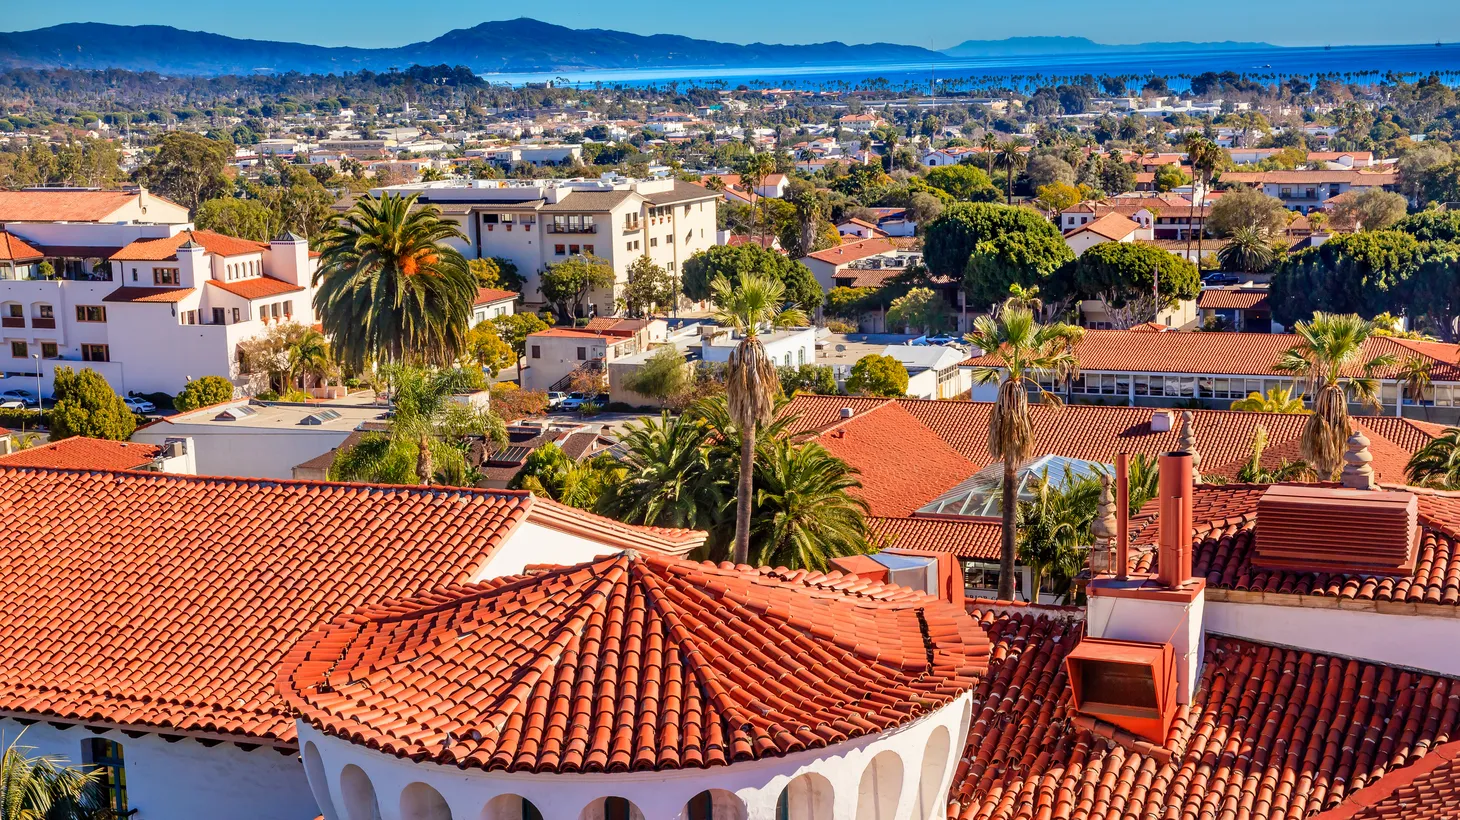 Santa Barbara is known for its diverse culinary scene and wide array of wineries.